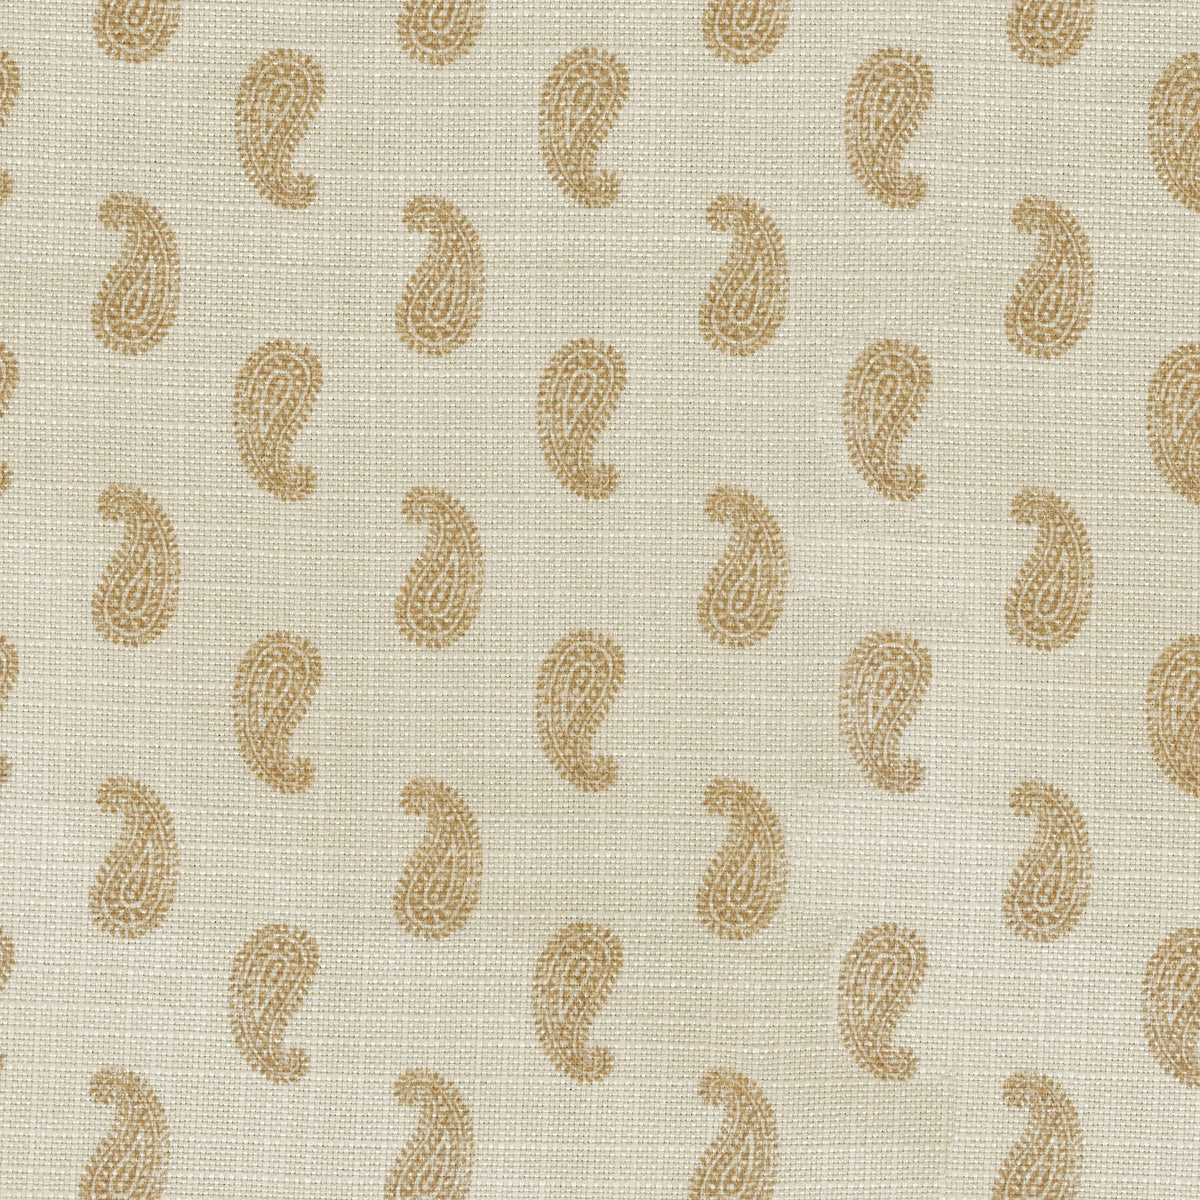 Performance + Simple Stamp - Gold 409223 Upholstery Fabric